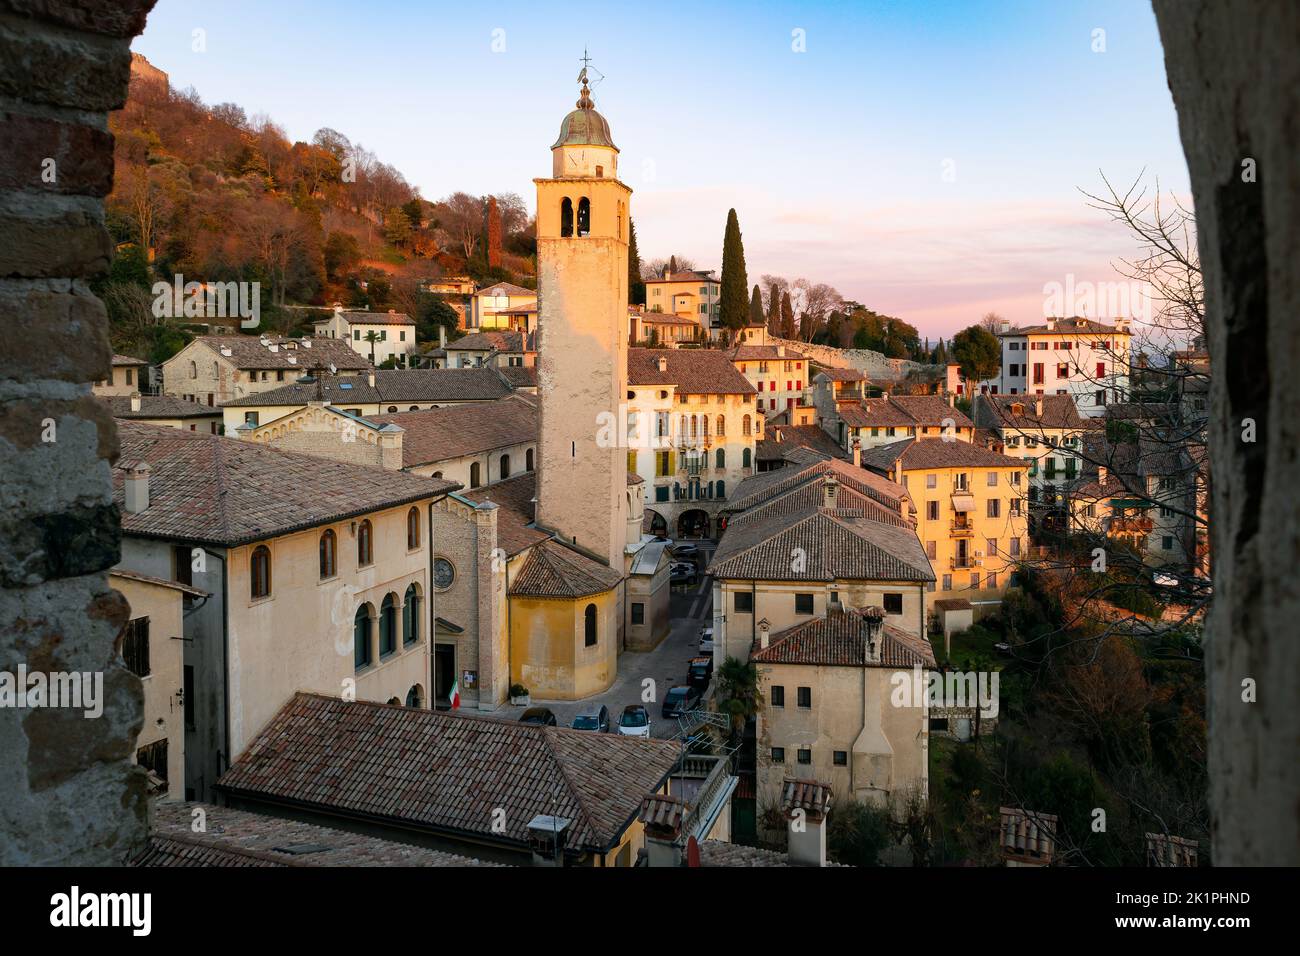 The Asolo historic center at sunset, Italy Stock Photo